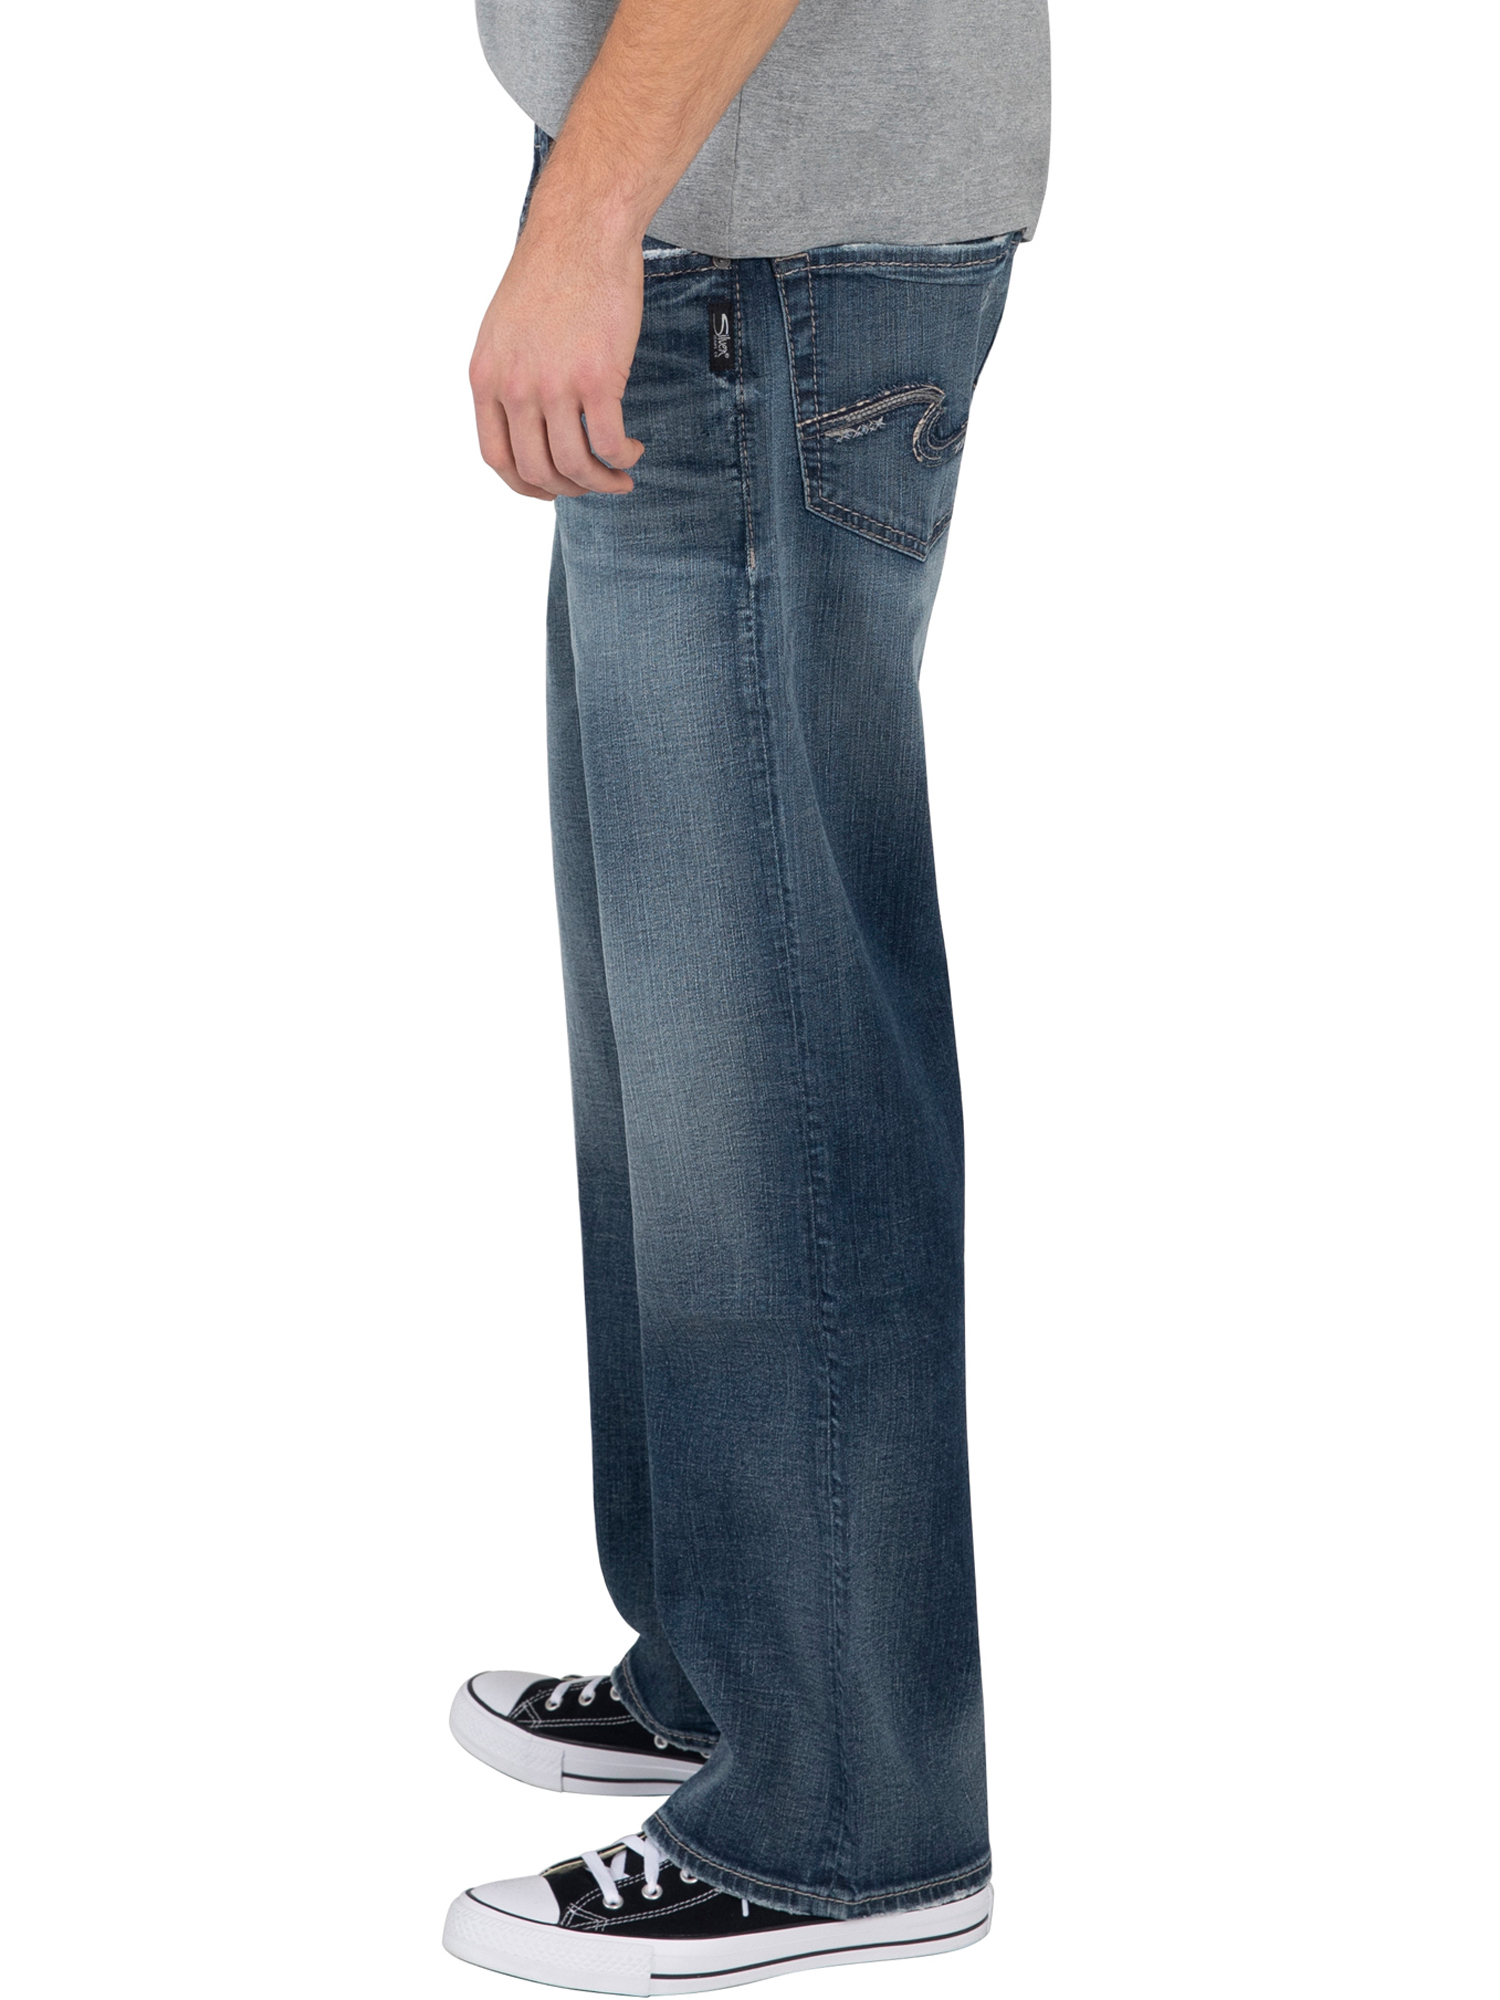 Silver Jeans Co. Men's Gordie Loose Fit Straight Leg Jeans, Waist Sizes 28-44 - image 3 of 3